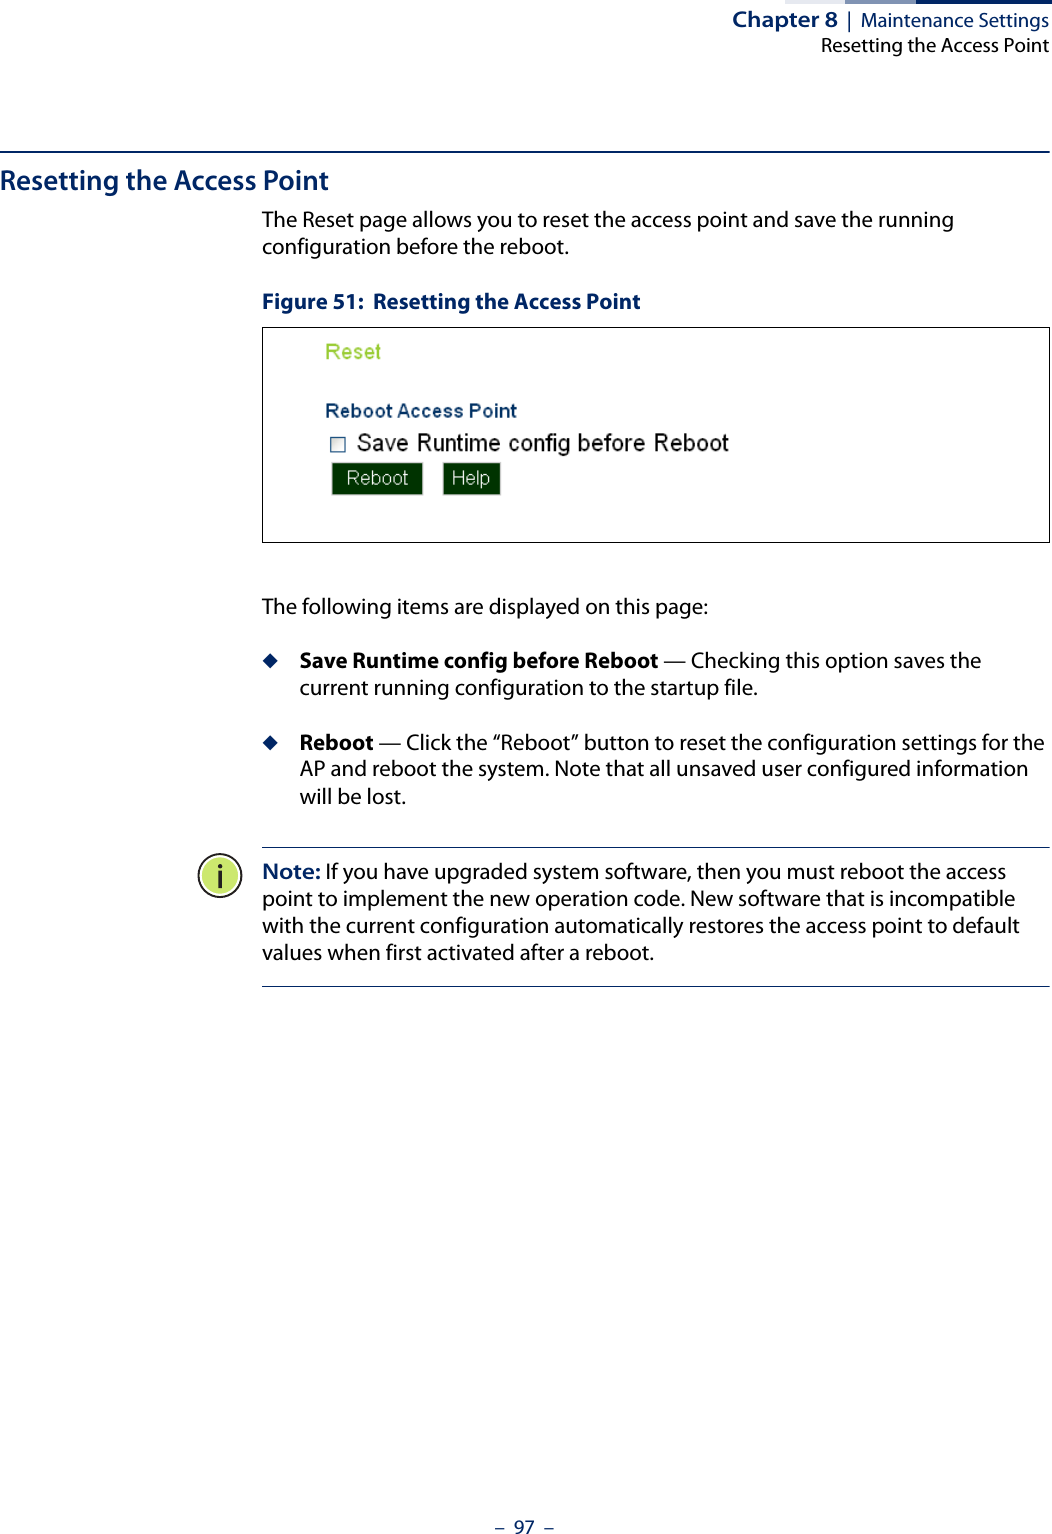 Chapter 8  |  Maintenance SettingsResetting the Access Point–  97  –Resetting the Access PointThe Reset page allows you to reset the access point and save the running configuration before the reboot.Figure 51:  Resetting the Access PointThe following items are displayed on this page:◆Save Runtime config before Reboot — Checking this option saves the current running configuration to the startup file.◆Reboot — Click the “Reboot” button to reset the configuration settings for the AP and reboot the system. Note that all unsaved user configured information will be lost. Note: If you have upgraded system software, then you must reboot the access point to implement the new operation code. New software that is incompatible with the current configuration automatically restores the access point to default values when first activated after a reboot.